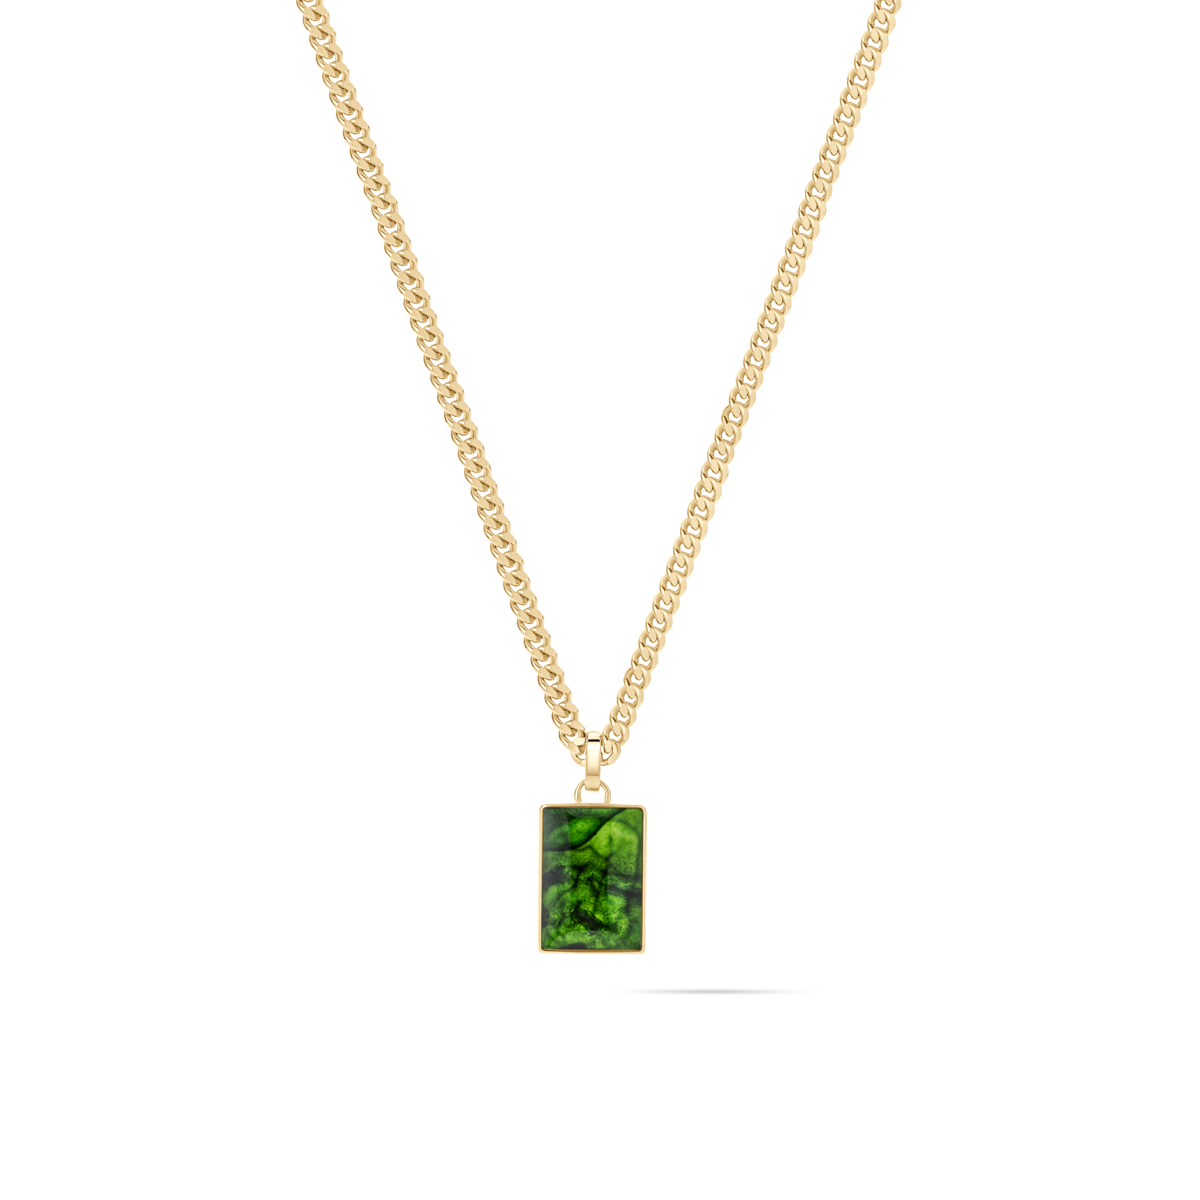 Order & Chaos Necklace Gold + Green - Kim Rose x MVMT